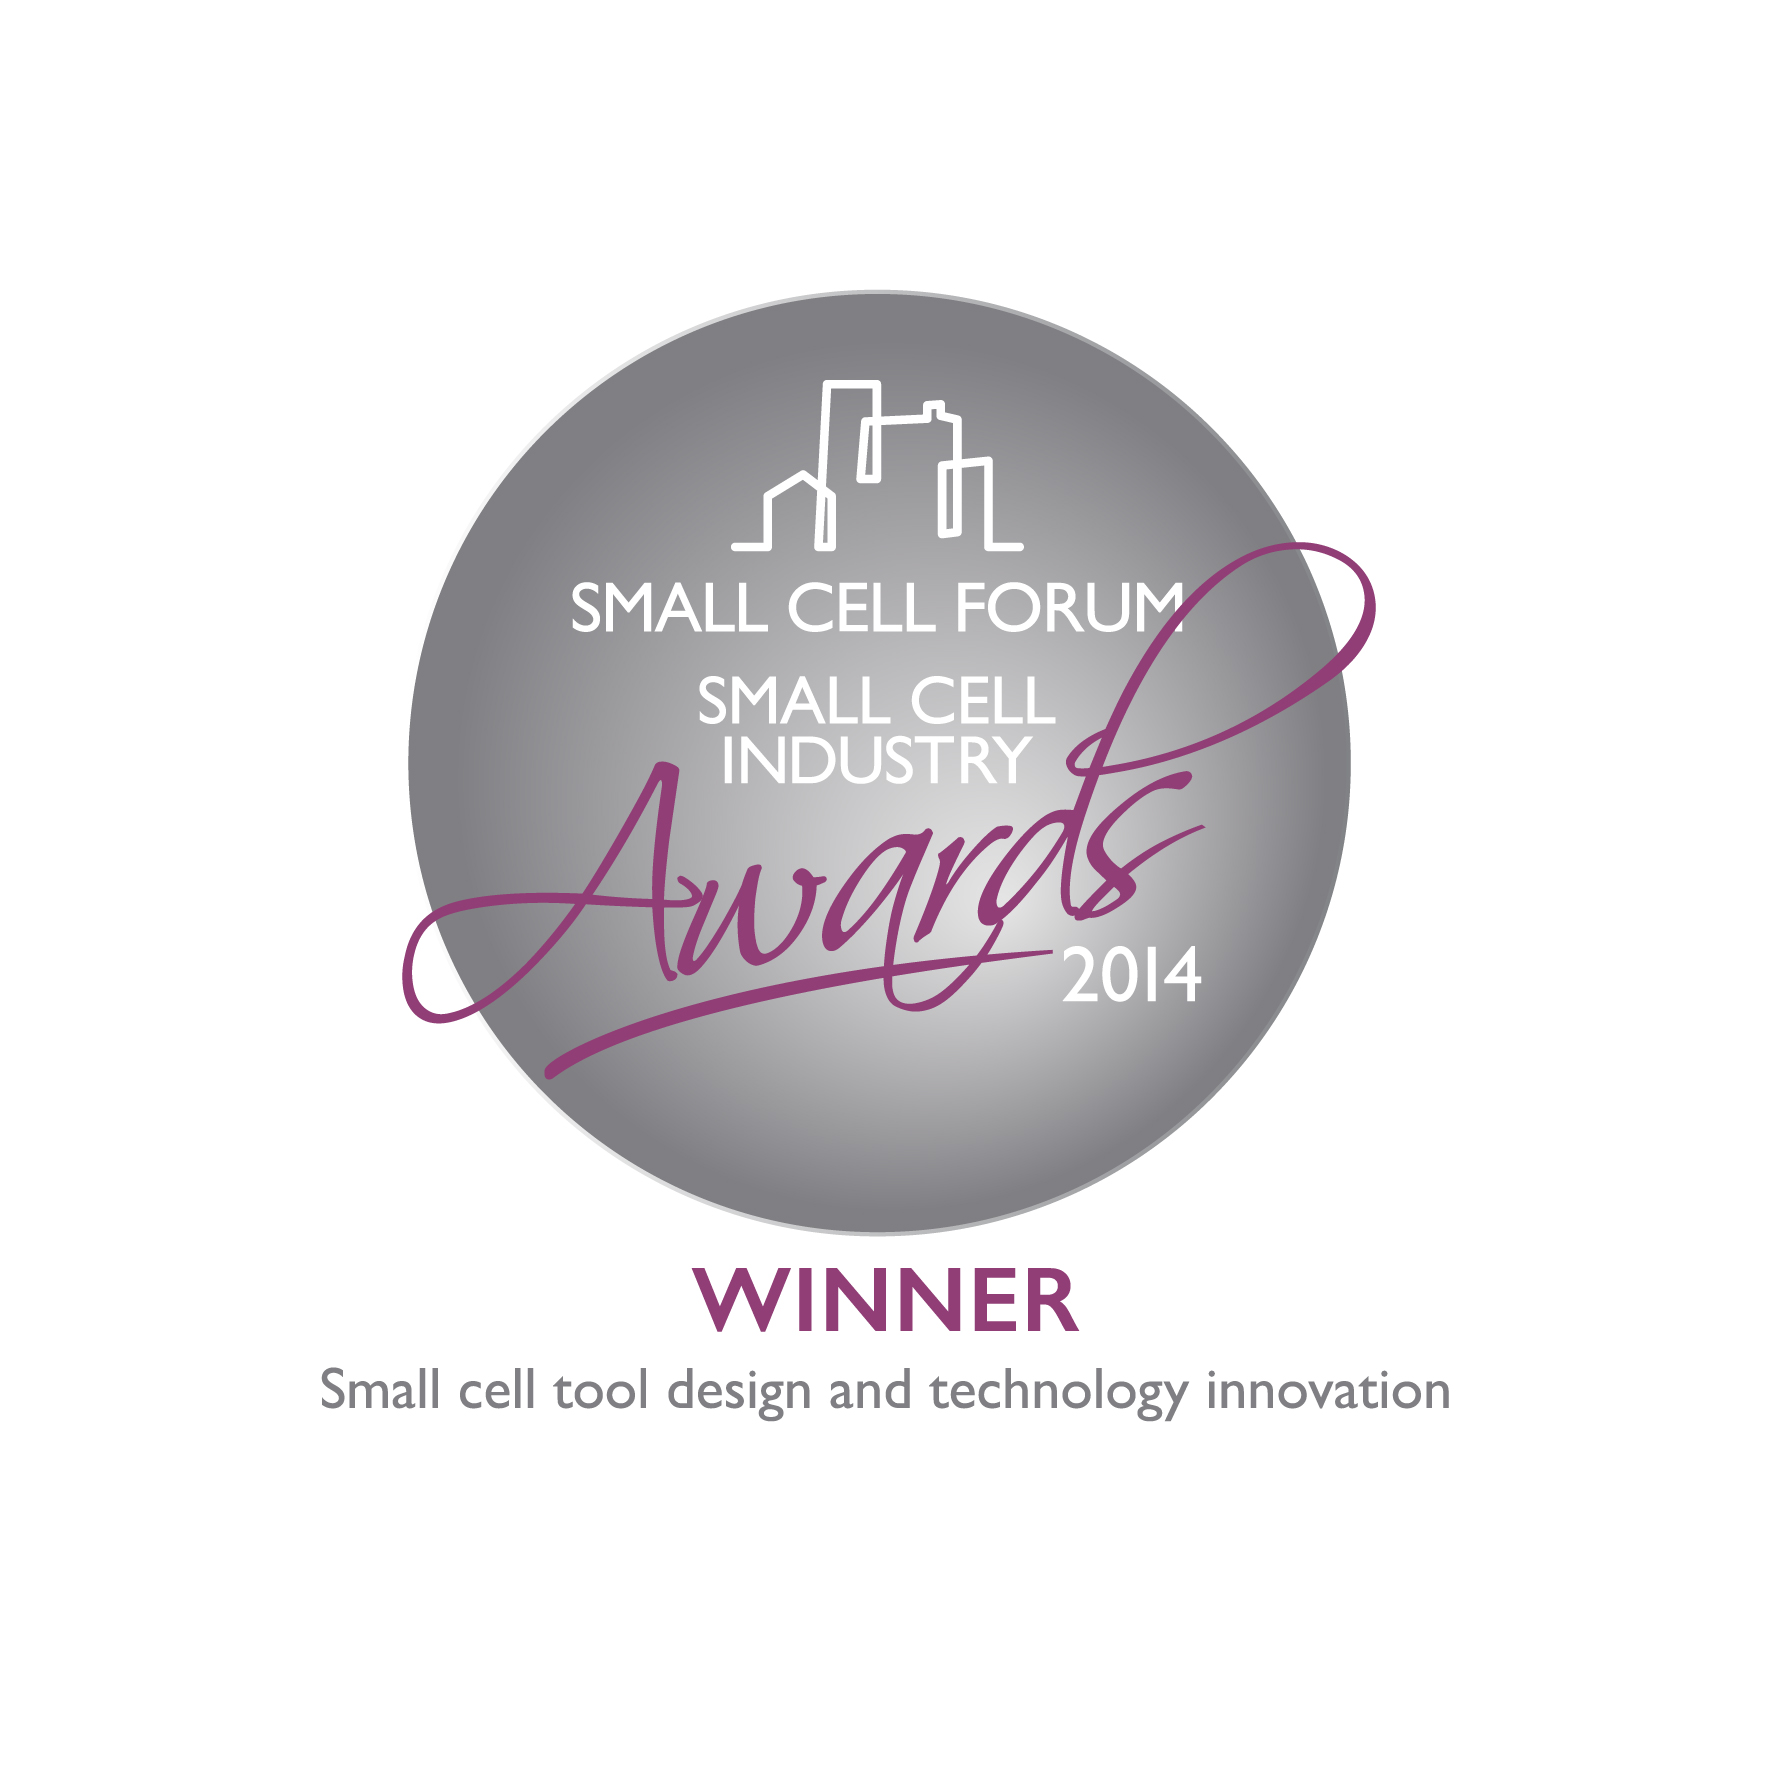 Small Cell Tool Design and Technology Innovation Award